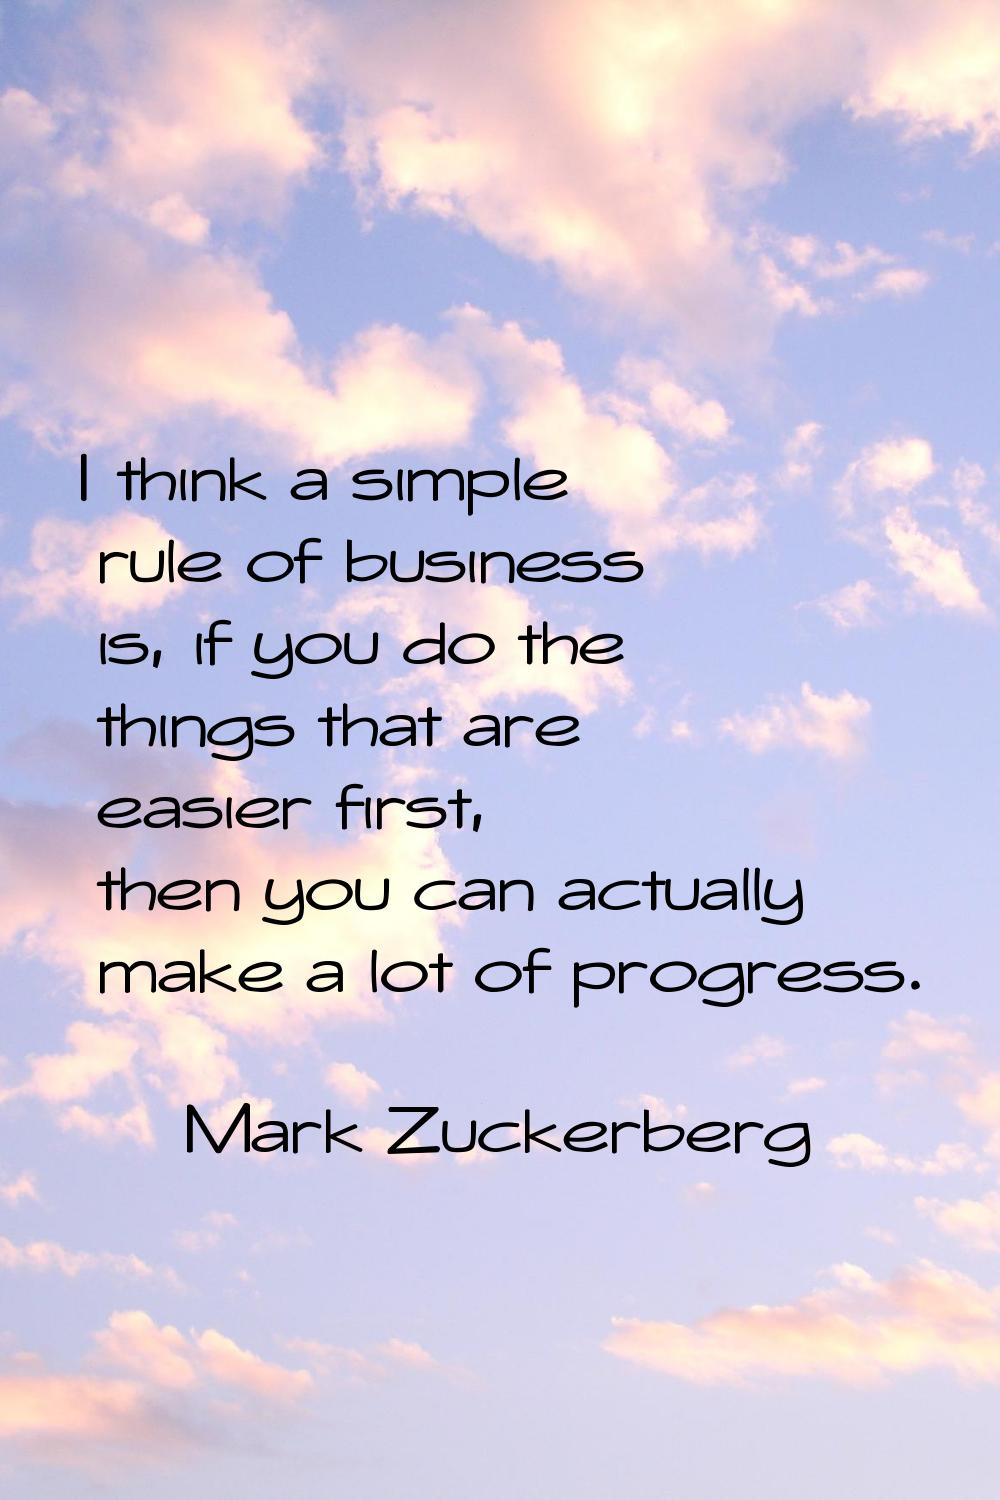 I think a simple rule of business is, if you do the things that are easier first, then you can actu